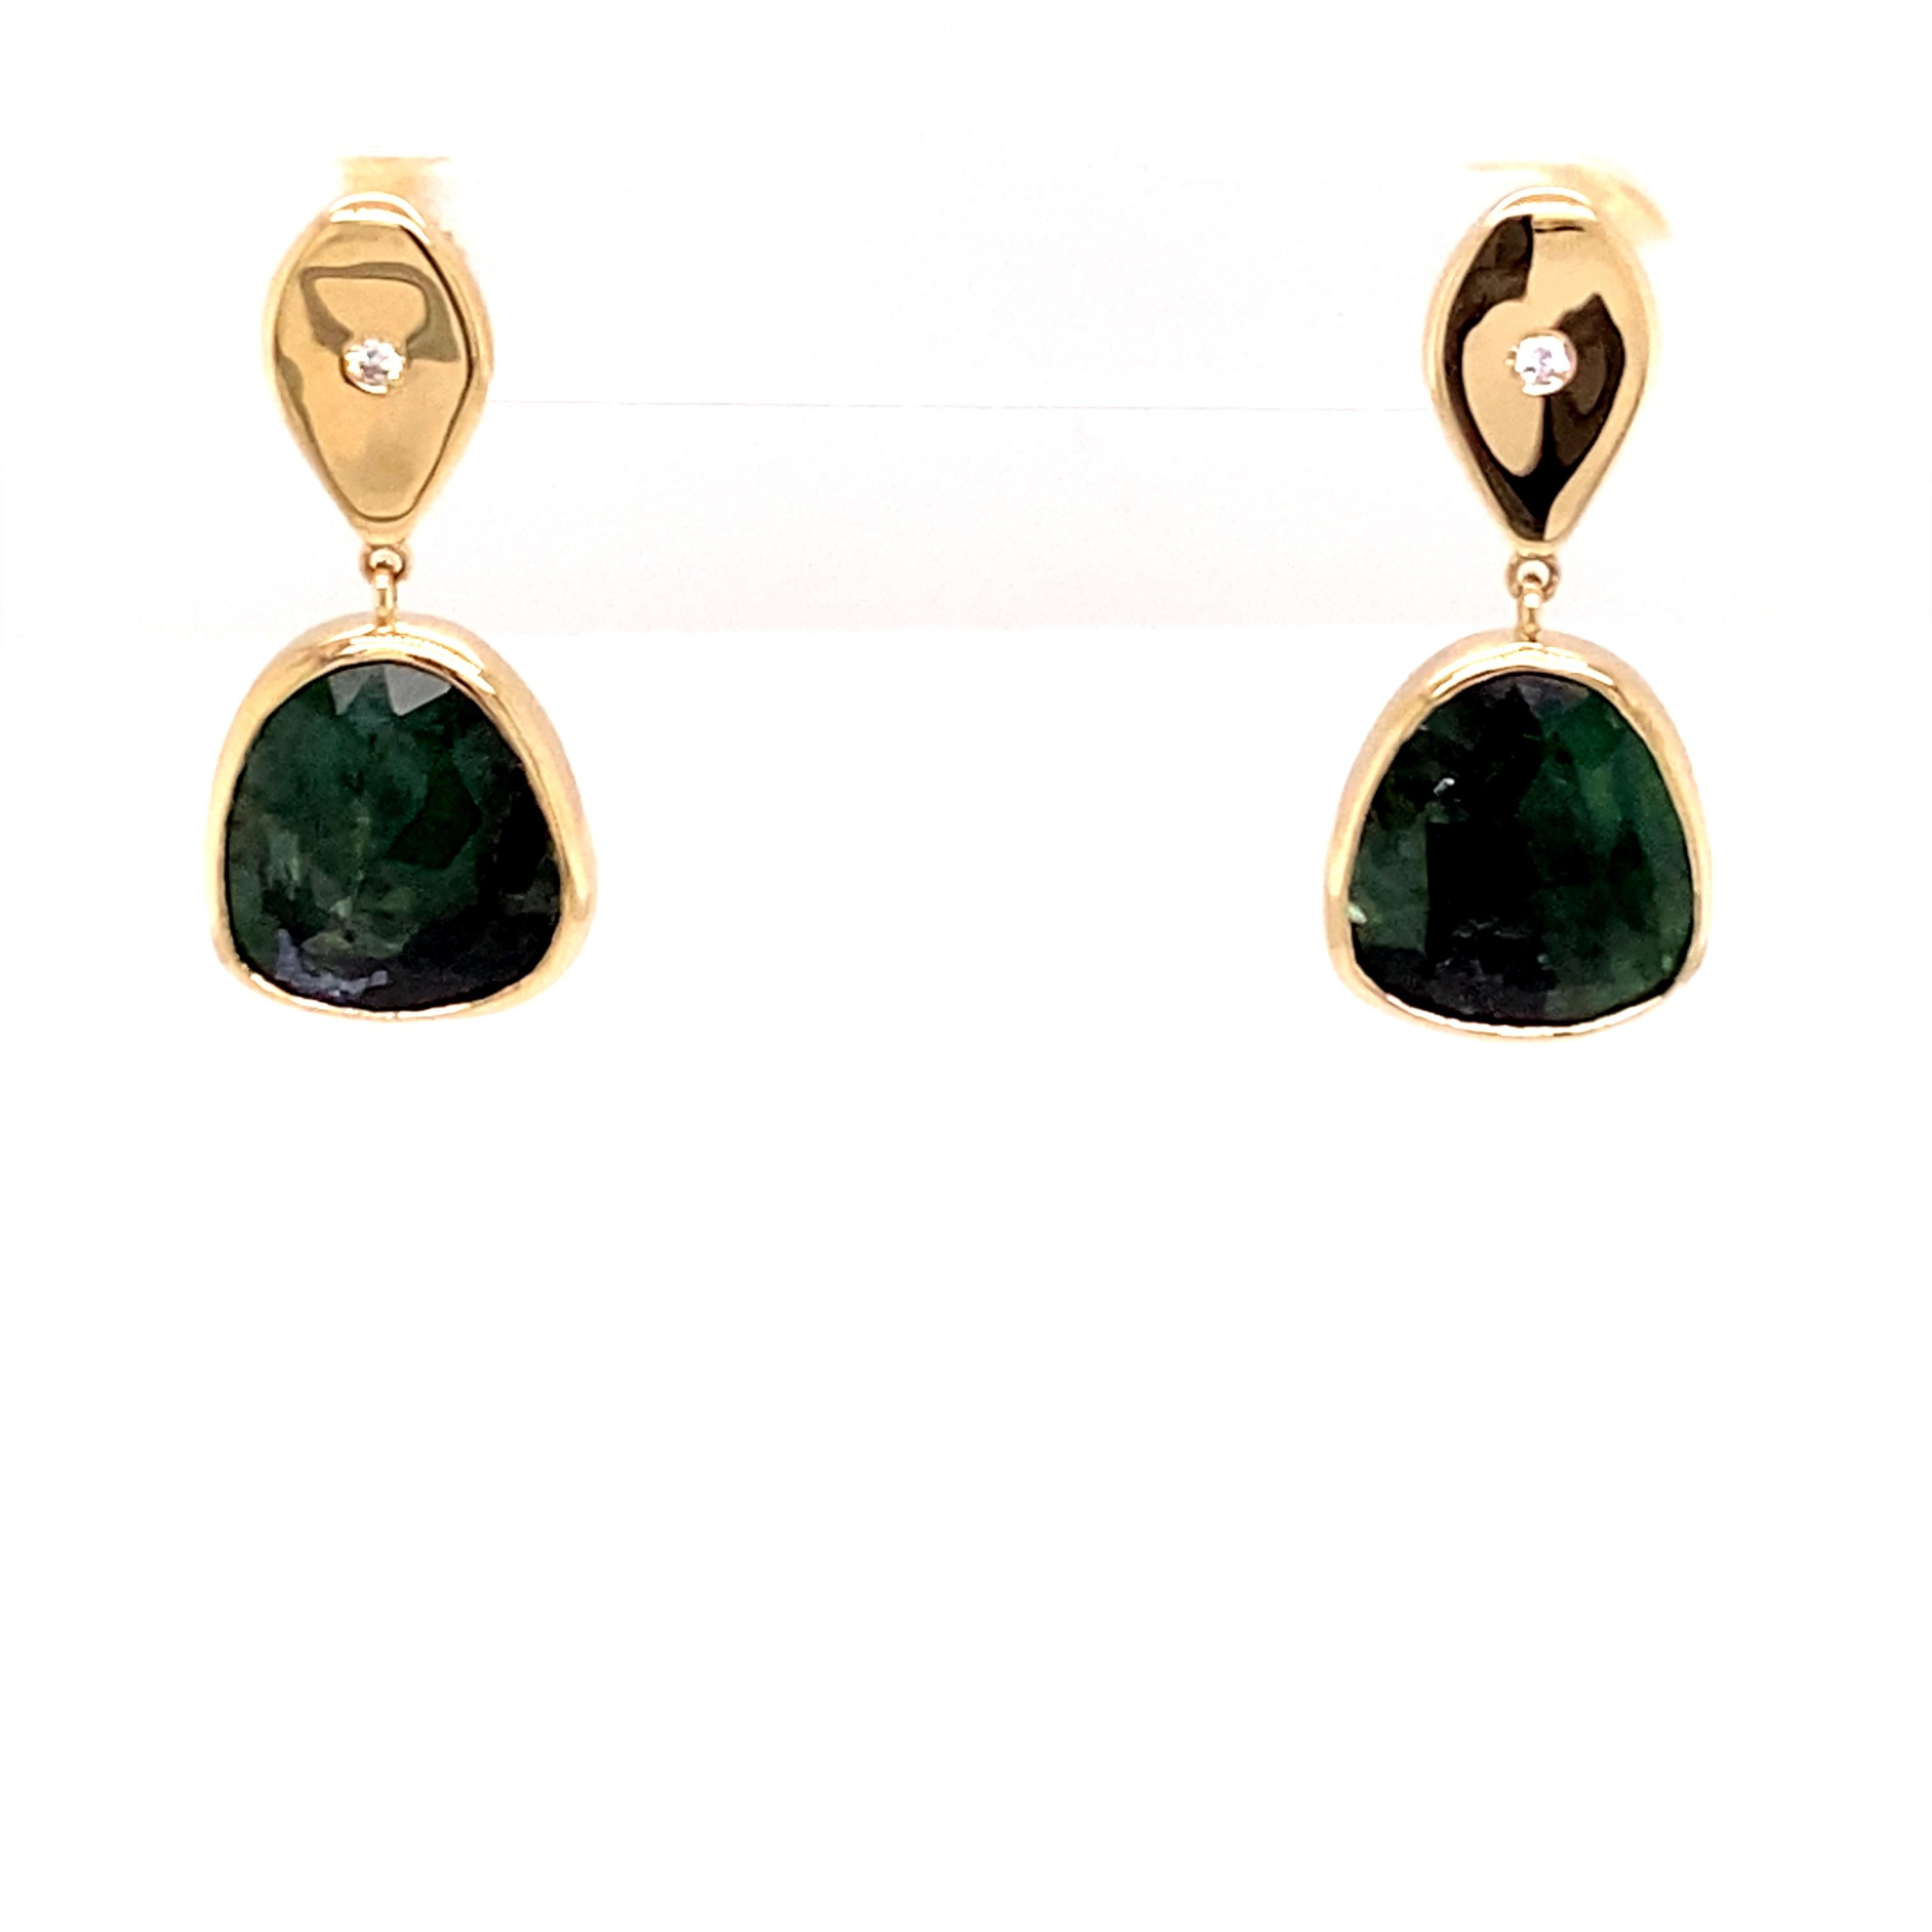 One of a Kind 14K Yellow Gold Teardrop with Natural Emerald Slice Drop Earrings.
Delicate and unique emerald slice earrings, are a luxurious addition to any fine jewelry collection. These earrings feature meticulously cut and polished emerald